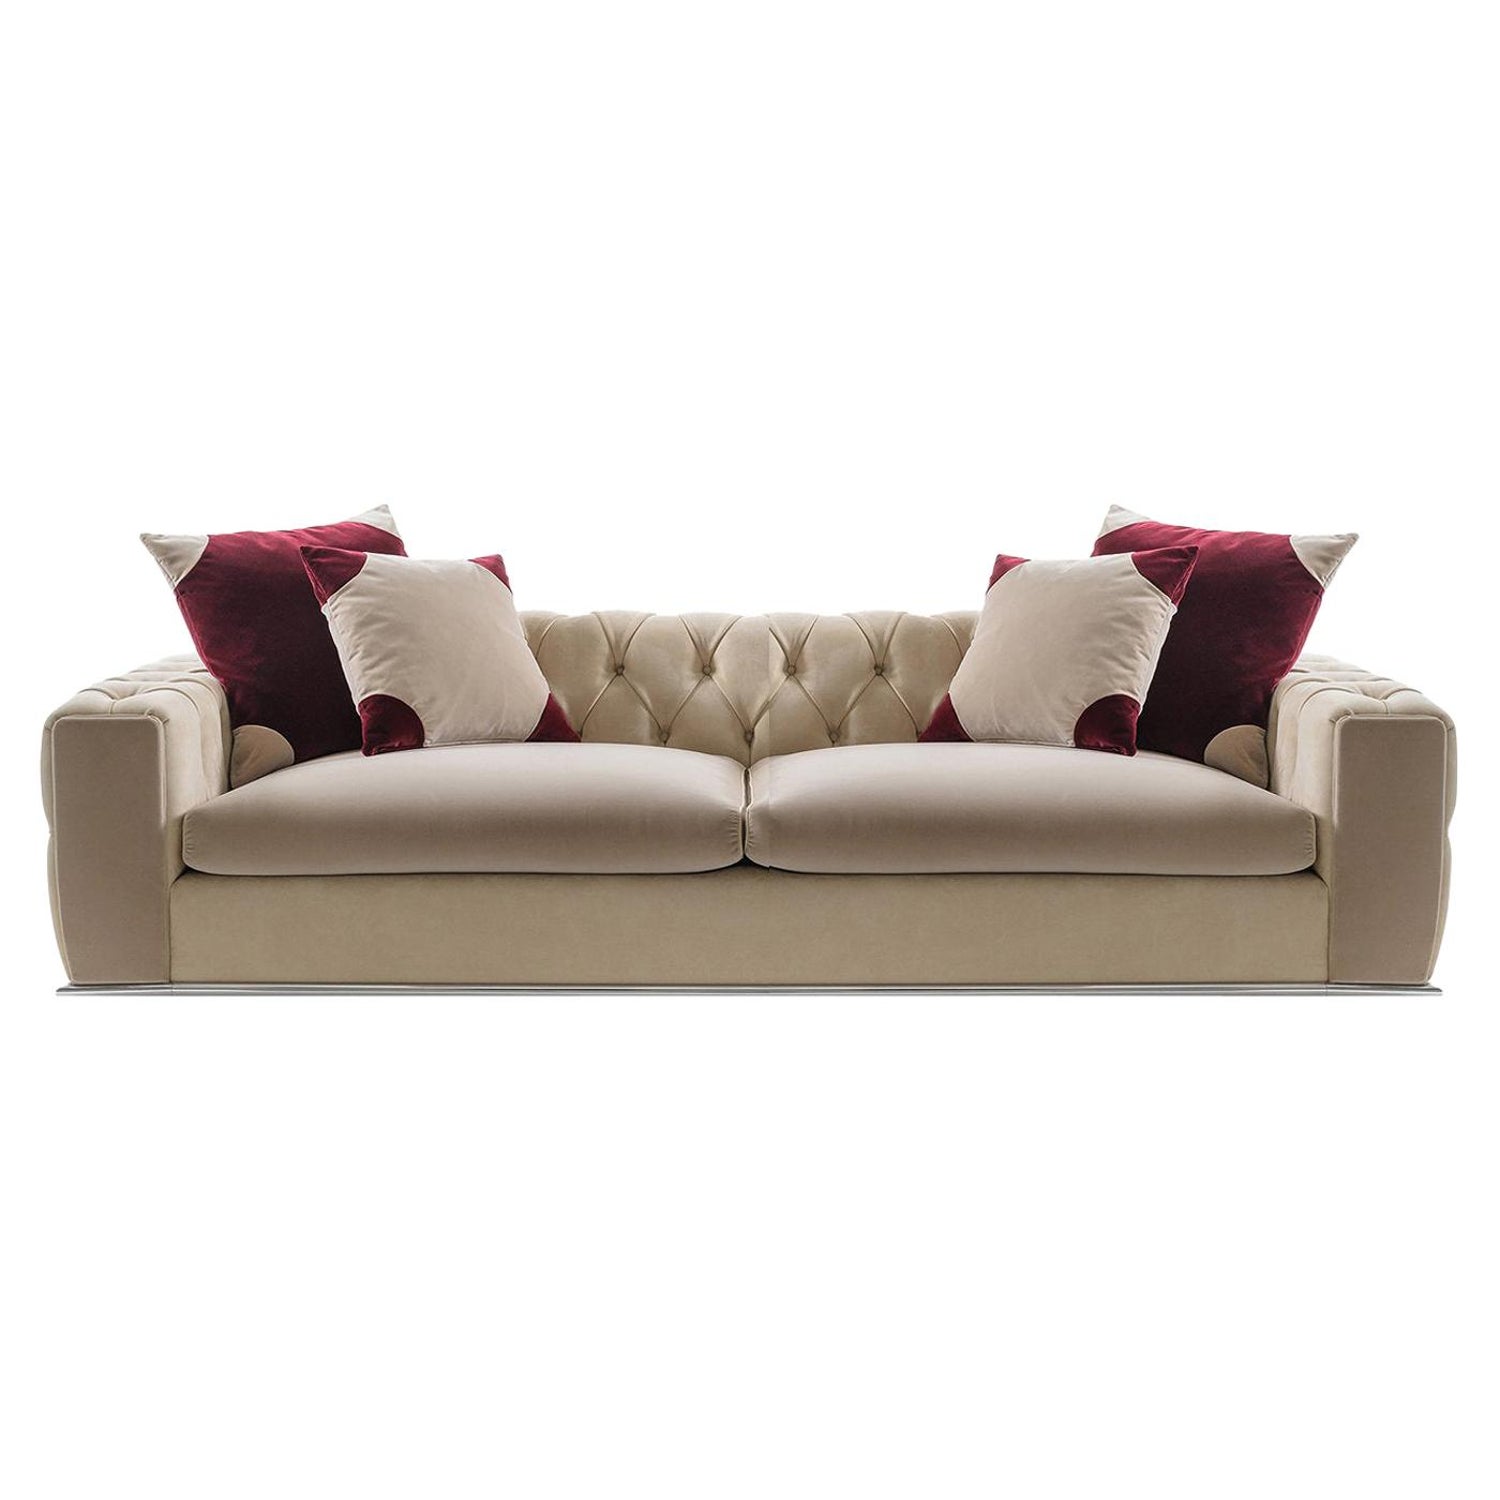 Tufted Beige Sofa For Sale at 1stDibs